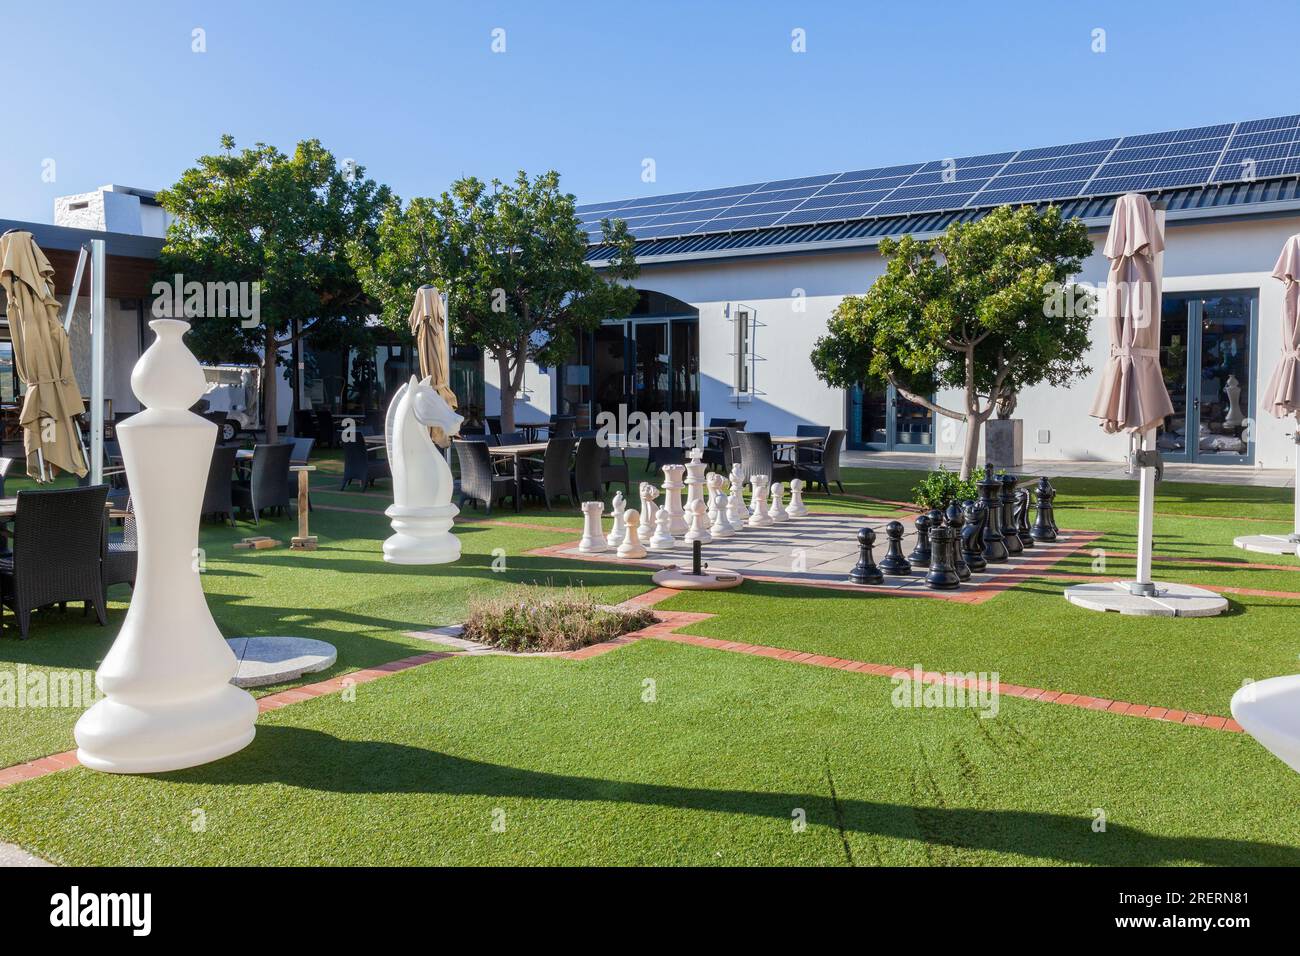 Outdoor chess in the central courtyard, Benguela Cove Winery, Walker Bay, Hermanus, Western Cape Winelands, South Africa rated in top 50 wineries glob Stock Photo